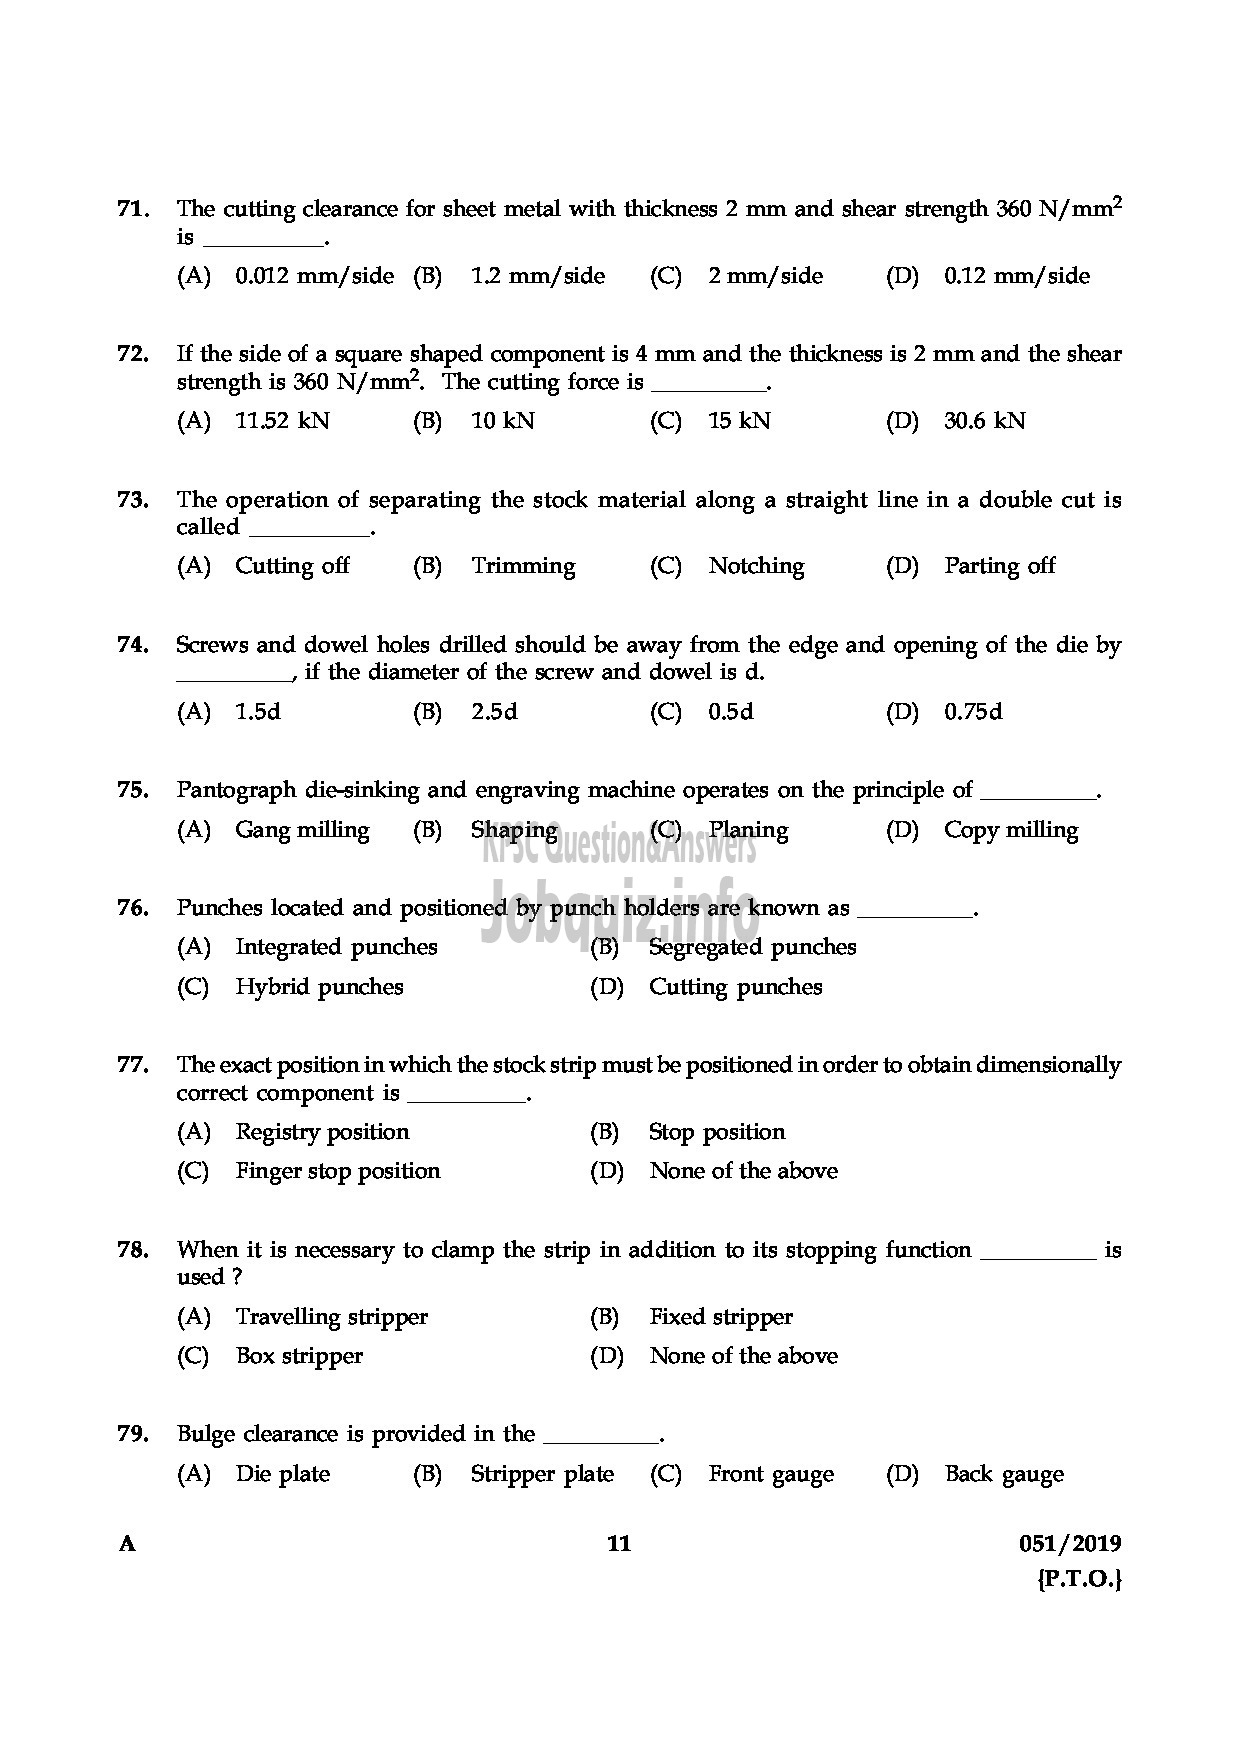 Kerala PSC Question Paper - JUNIOR INSTRUCTOR TOOL & DIE MAKER INDUSTRIAL TRAINING English -11